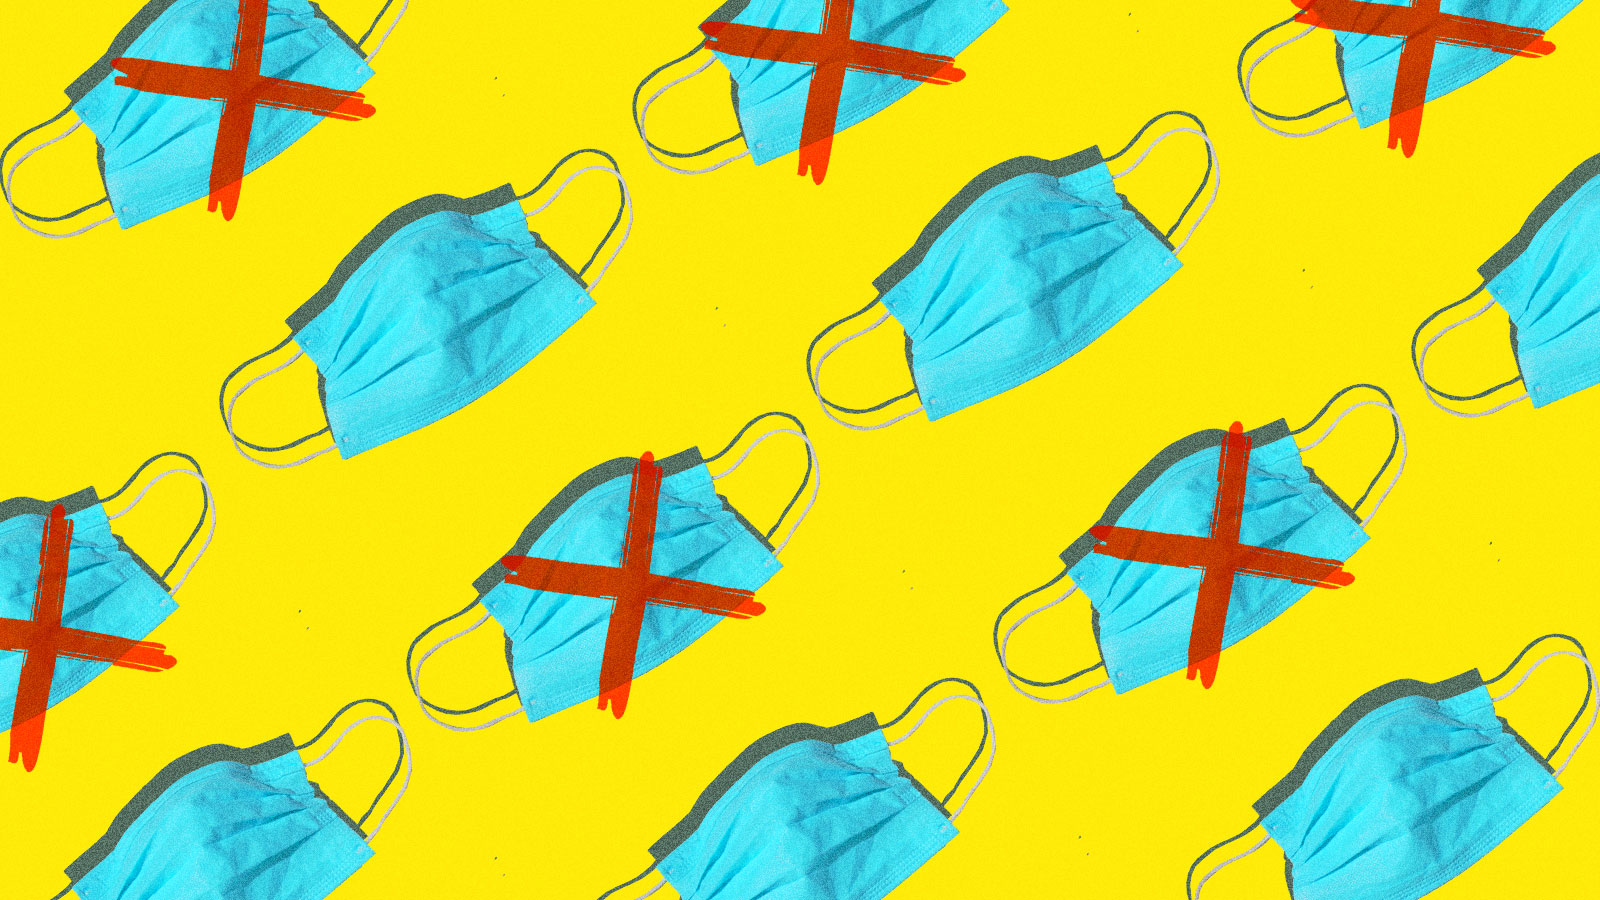 A pattern of face masks, some with red exes on top of them, on a yellow background